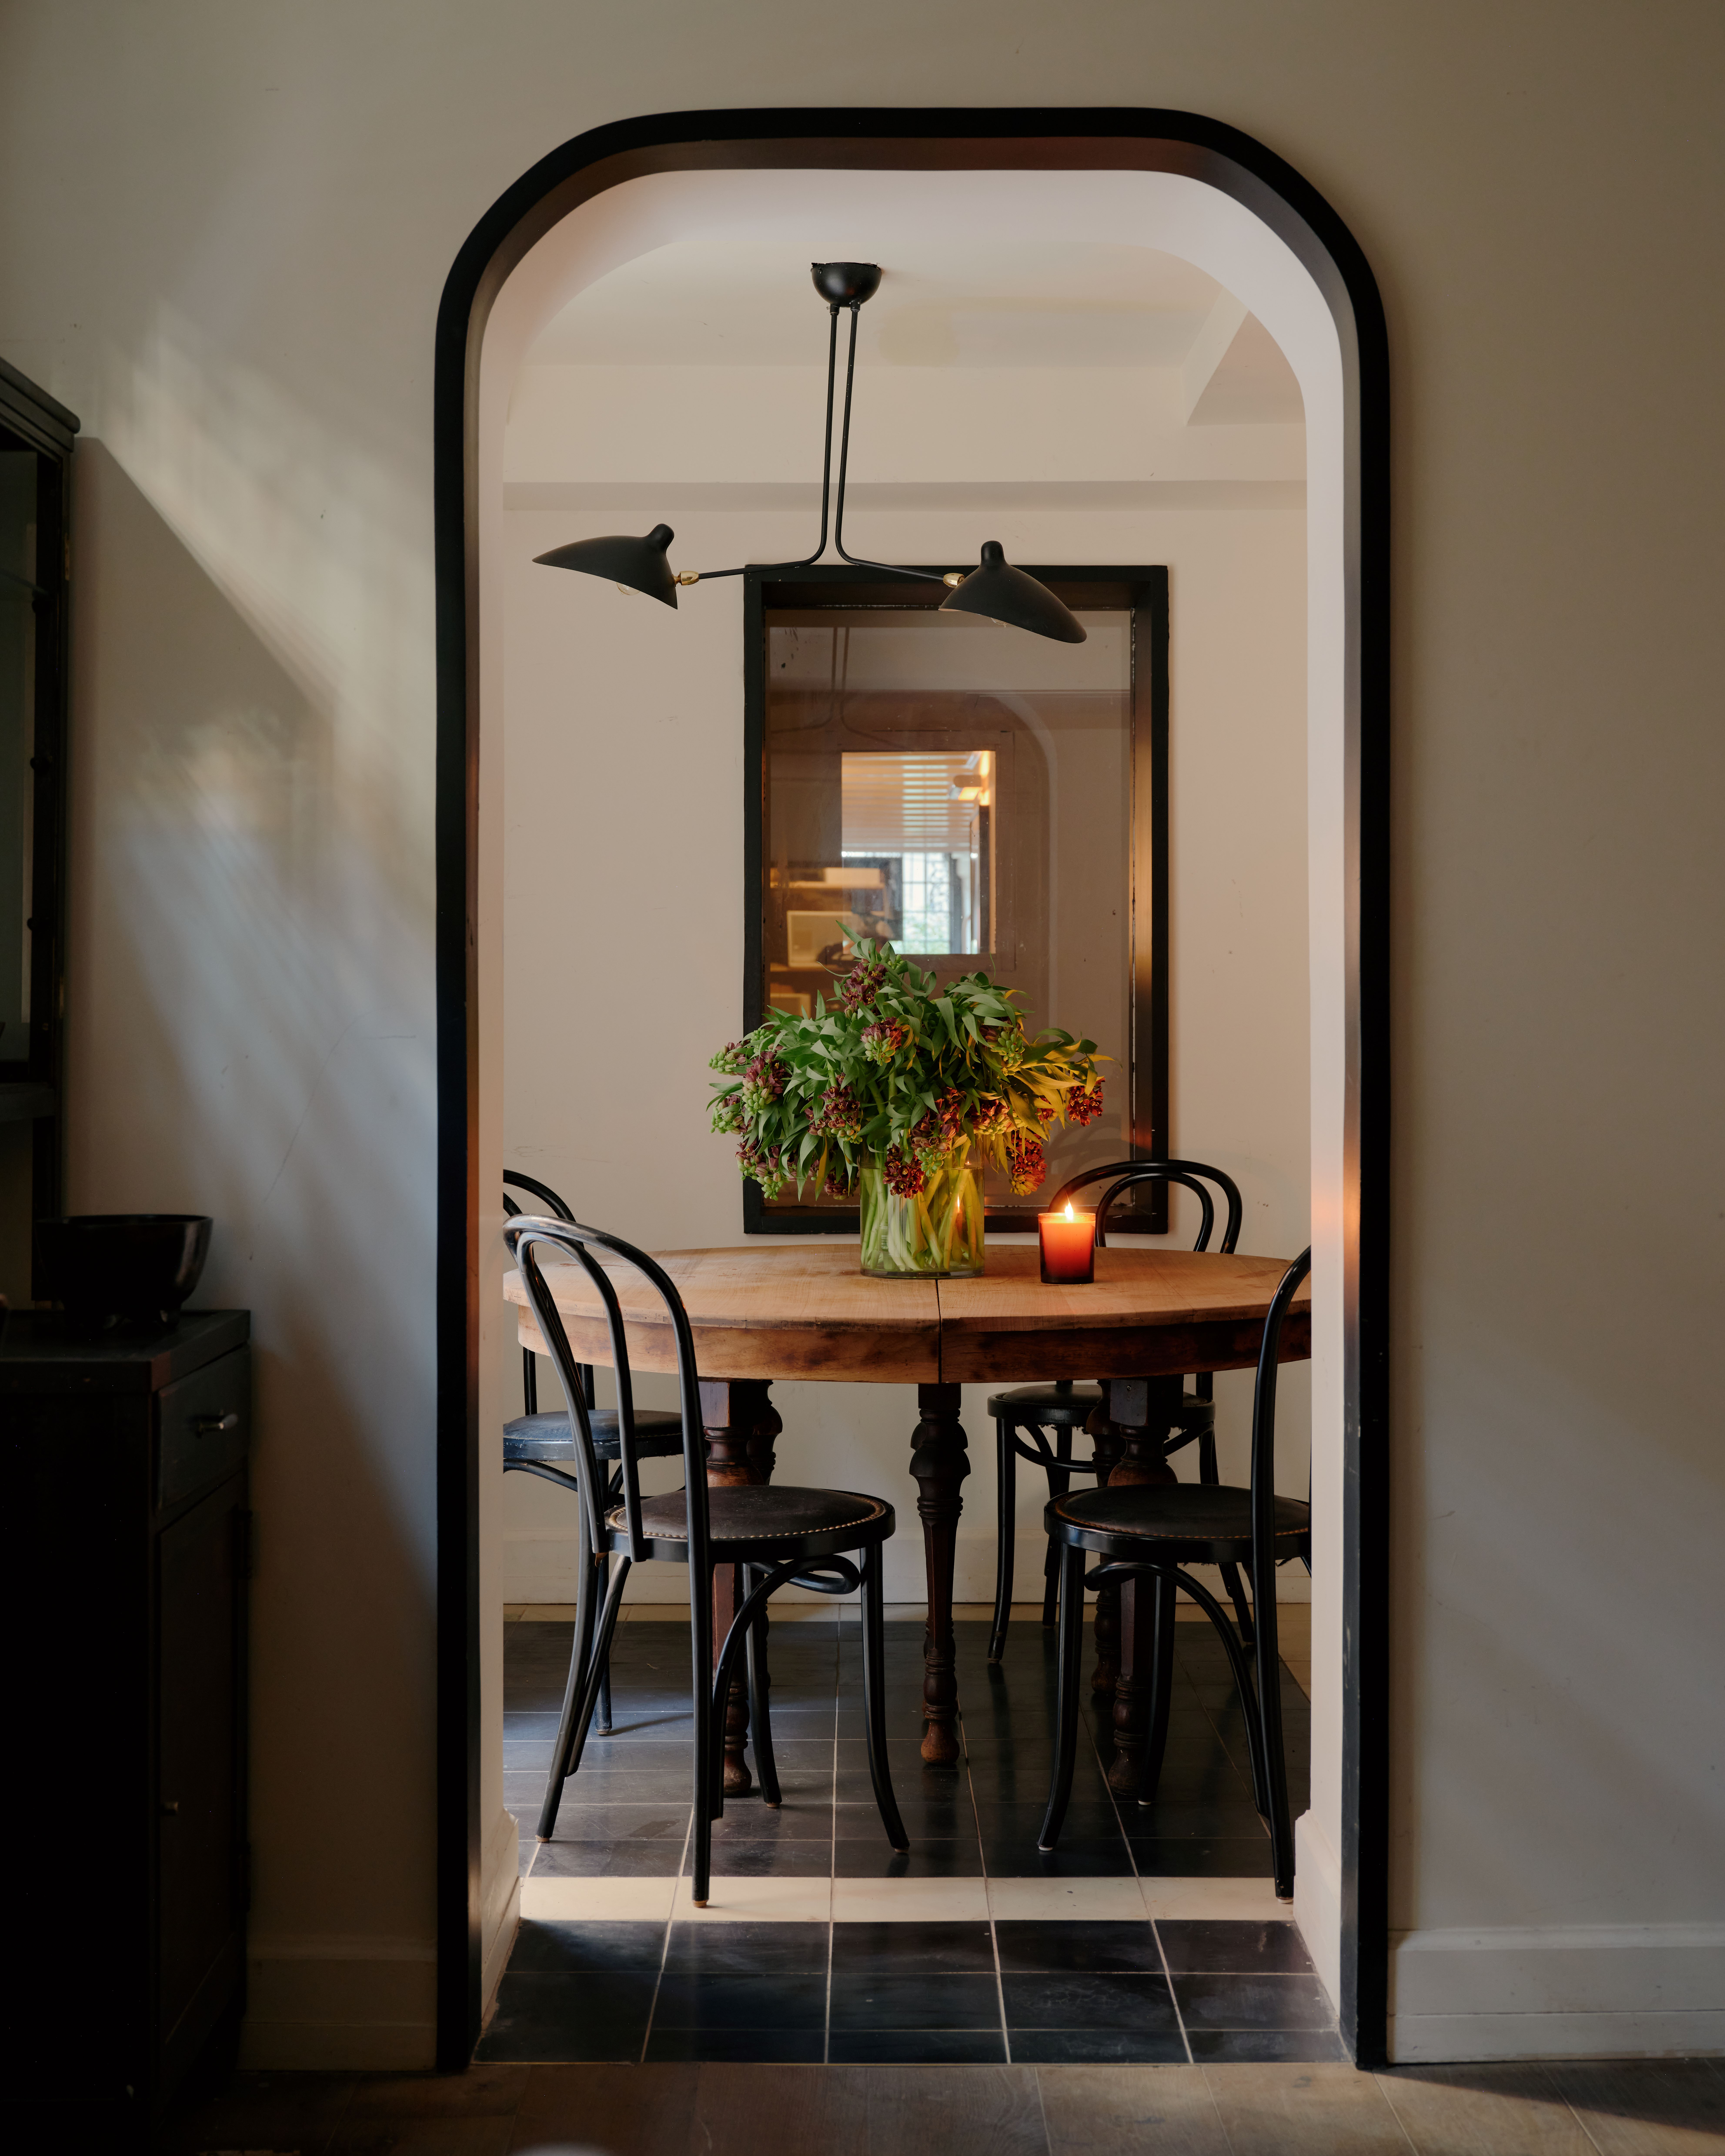 An open door into an intimate dining space